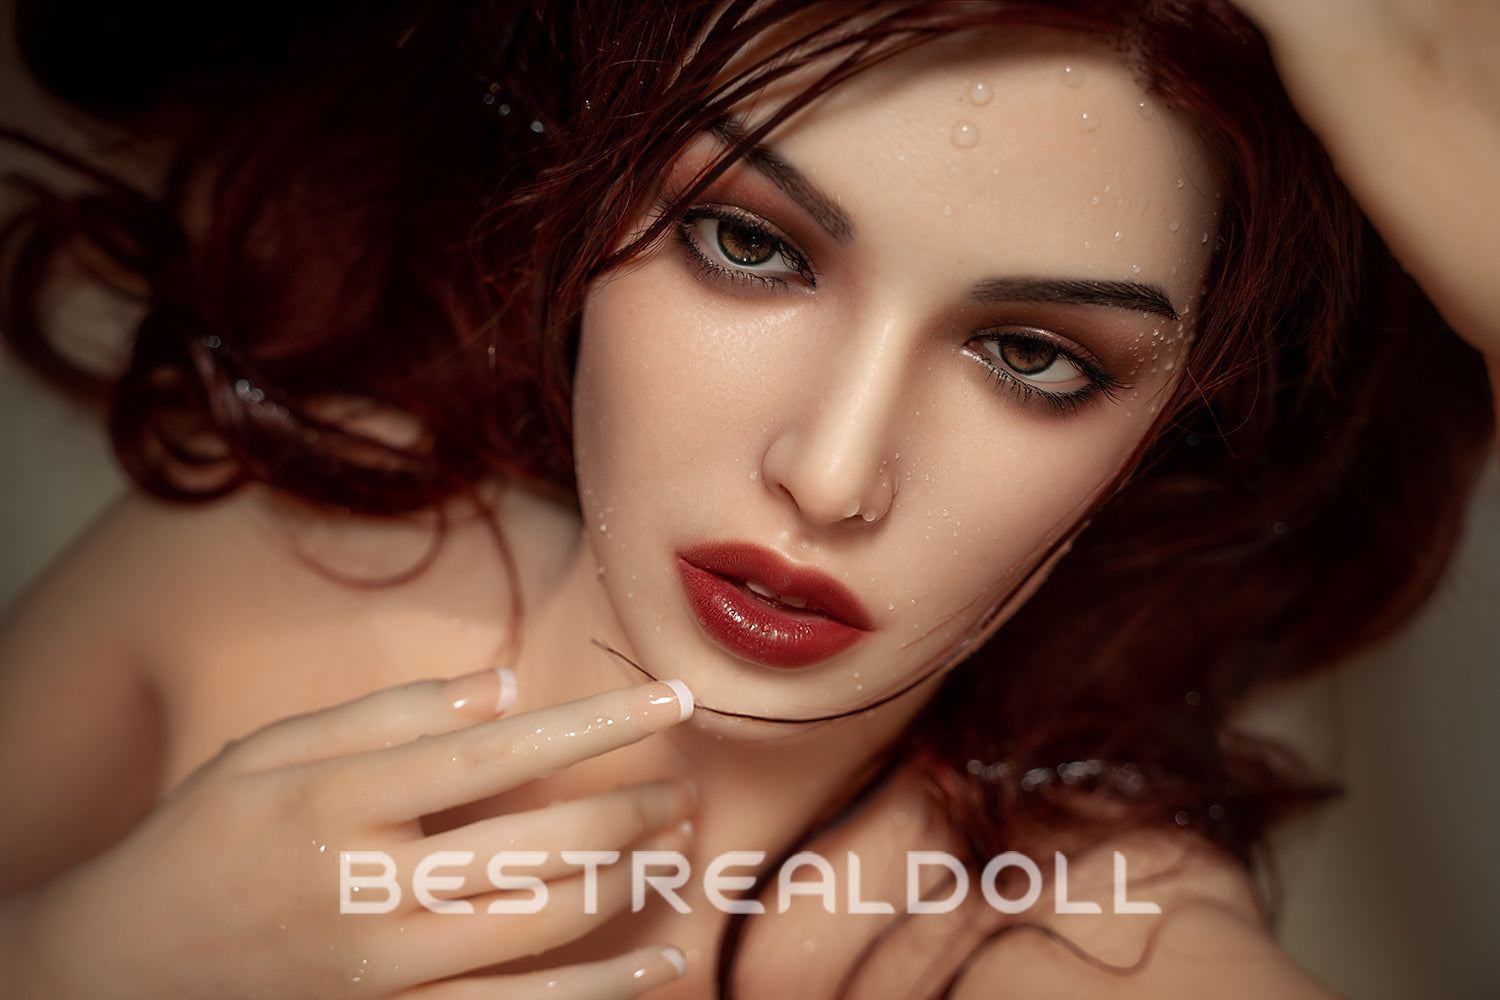 US Stock - RIDMII Gracy Unique Design 166cm Silicone Head Sex Doll TPE Body Red Hair Small Breasts Adult Love Doll